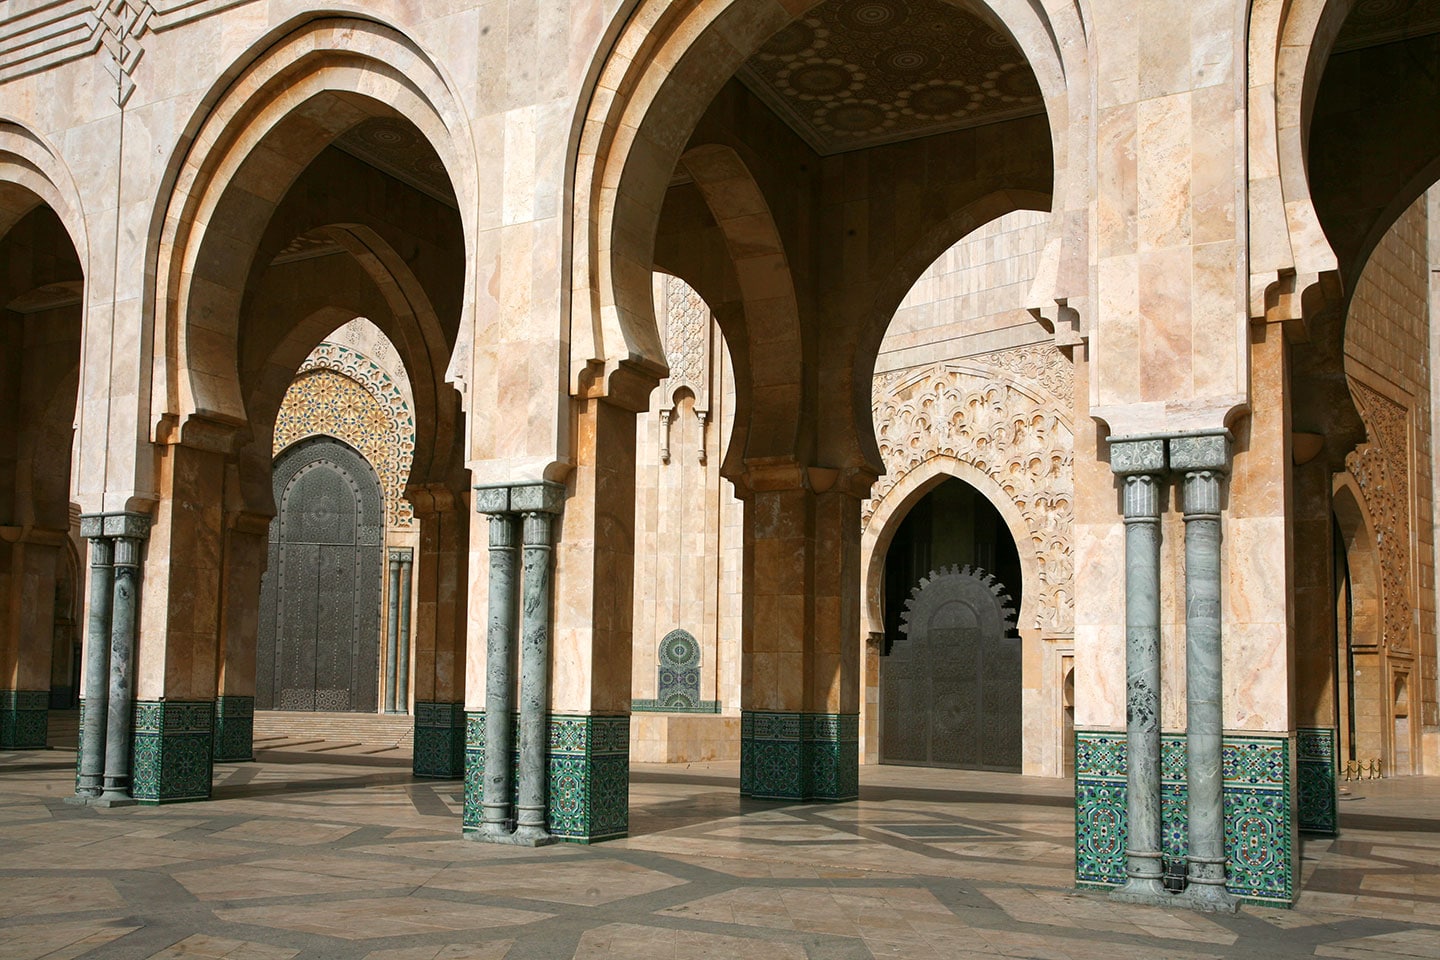 Detail of the Hassan II Mosque in Casablanca, Morocco